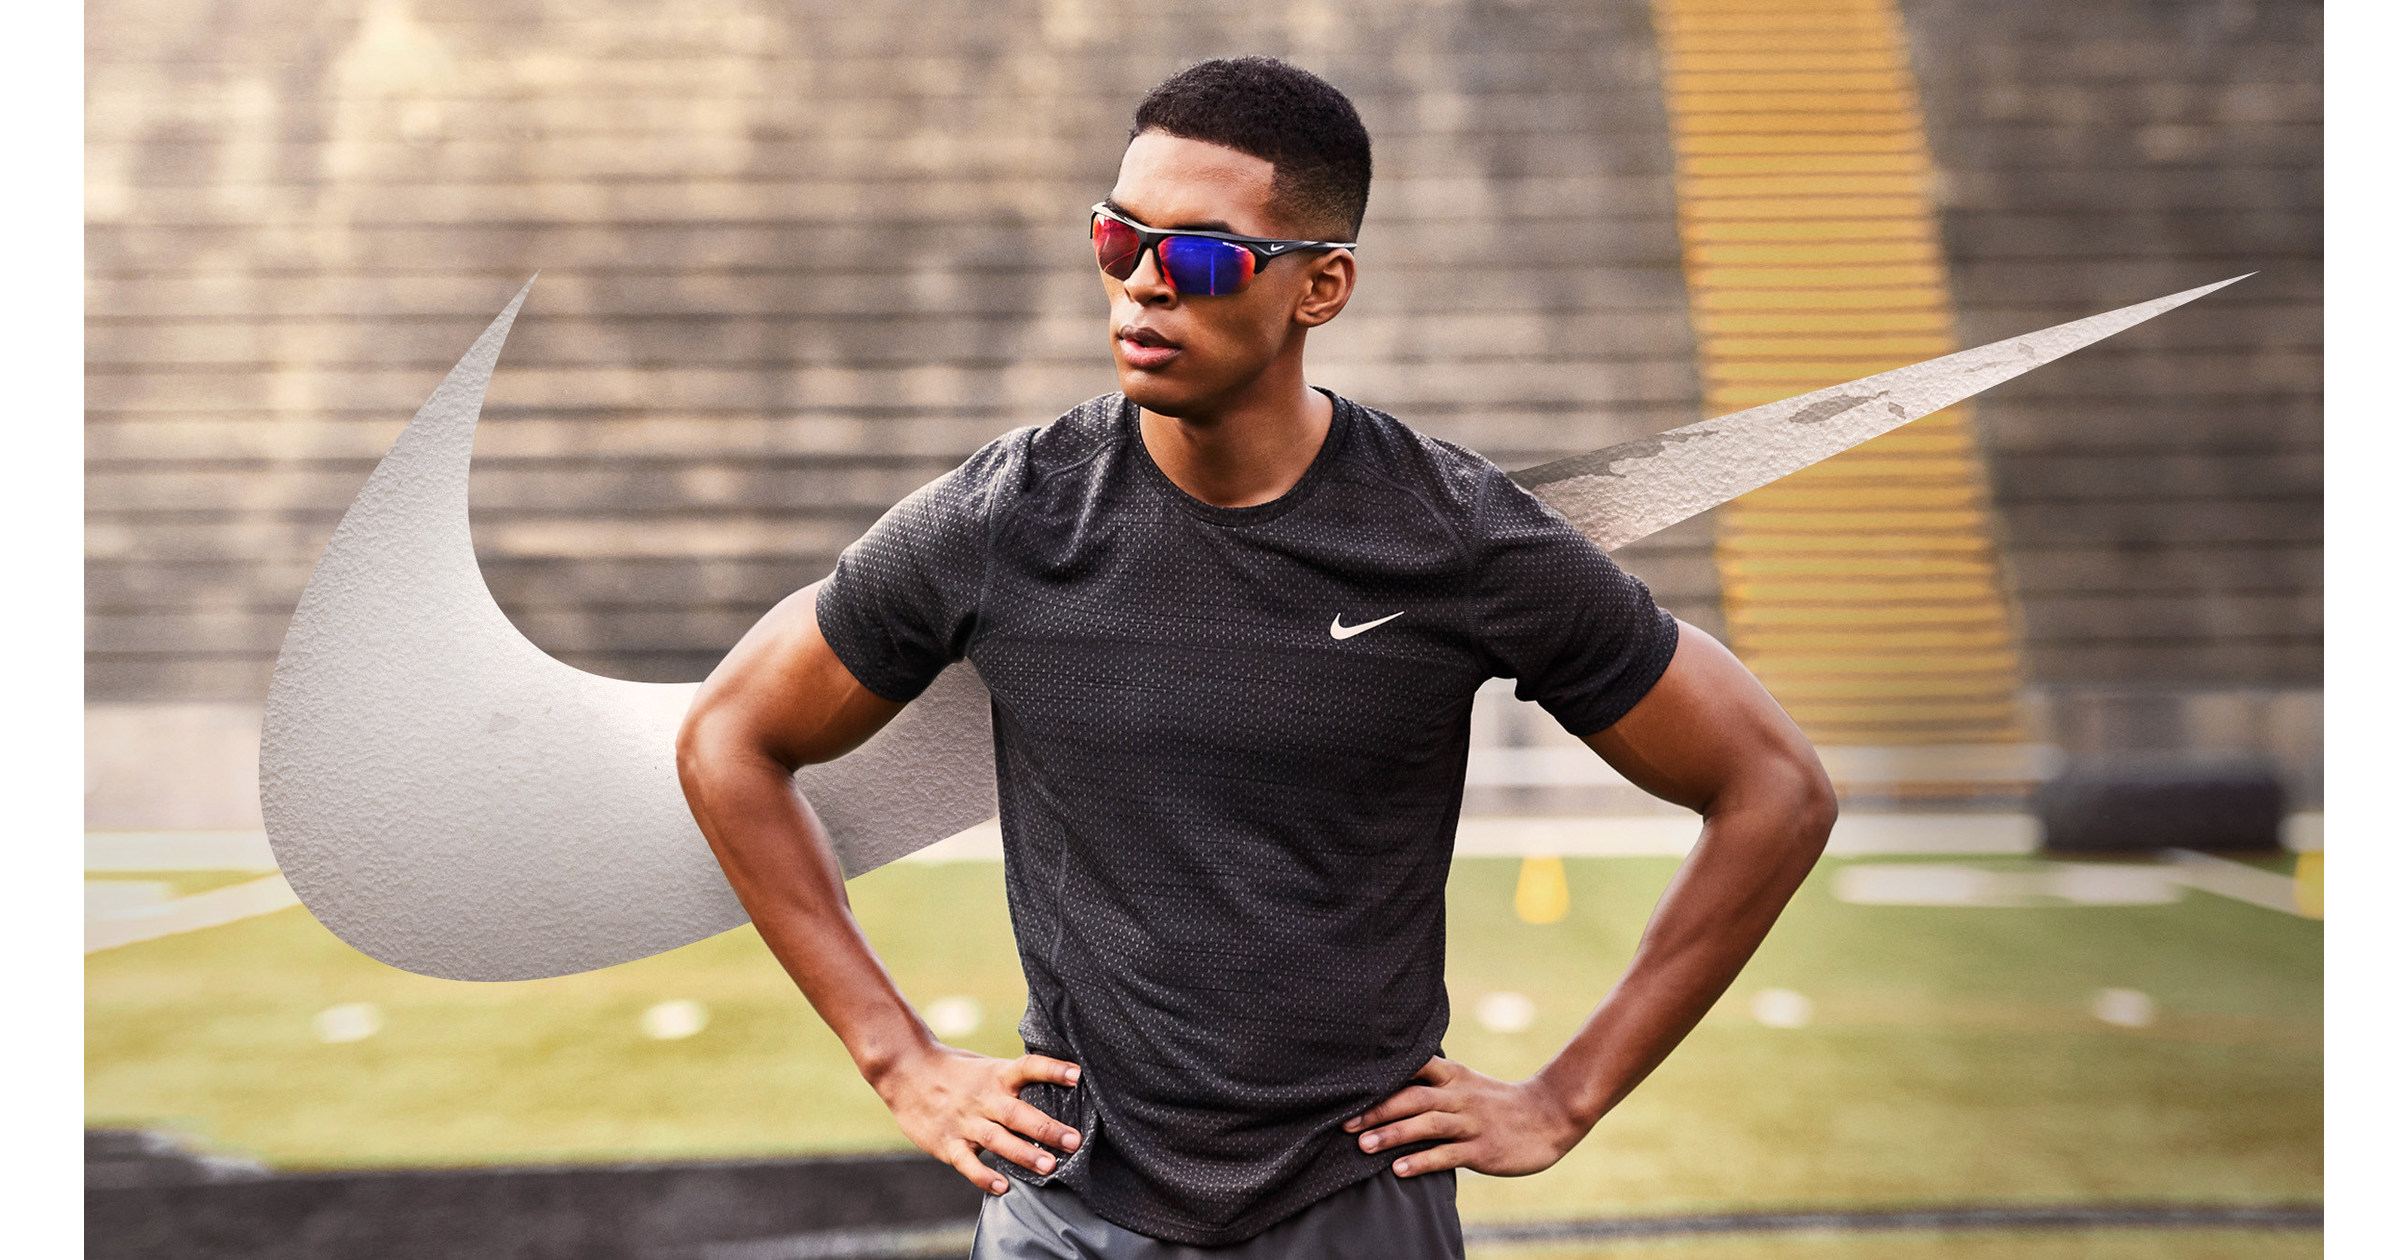 Nike Vision Launches New Men's Training Sunglass Collection